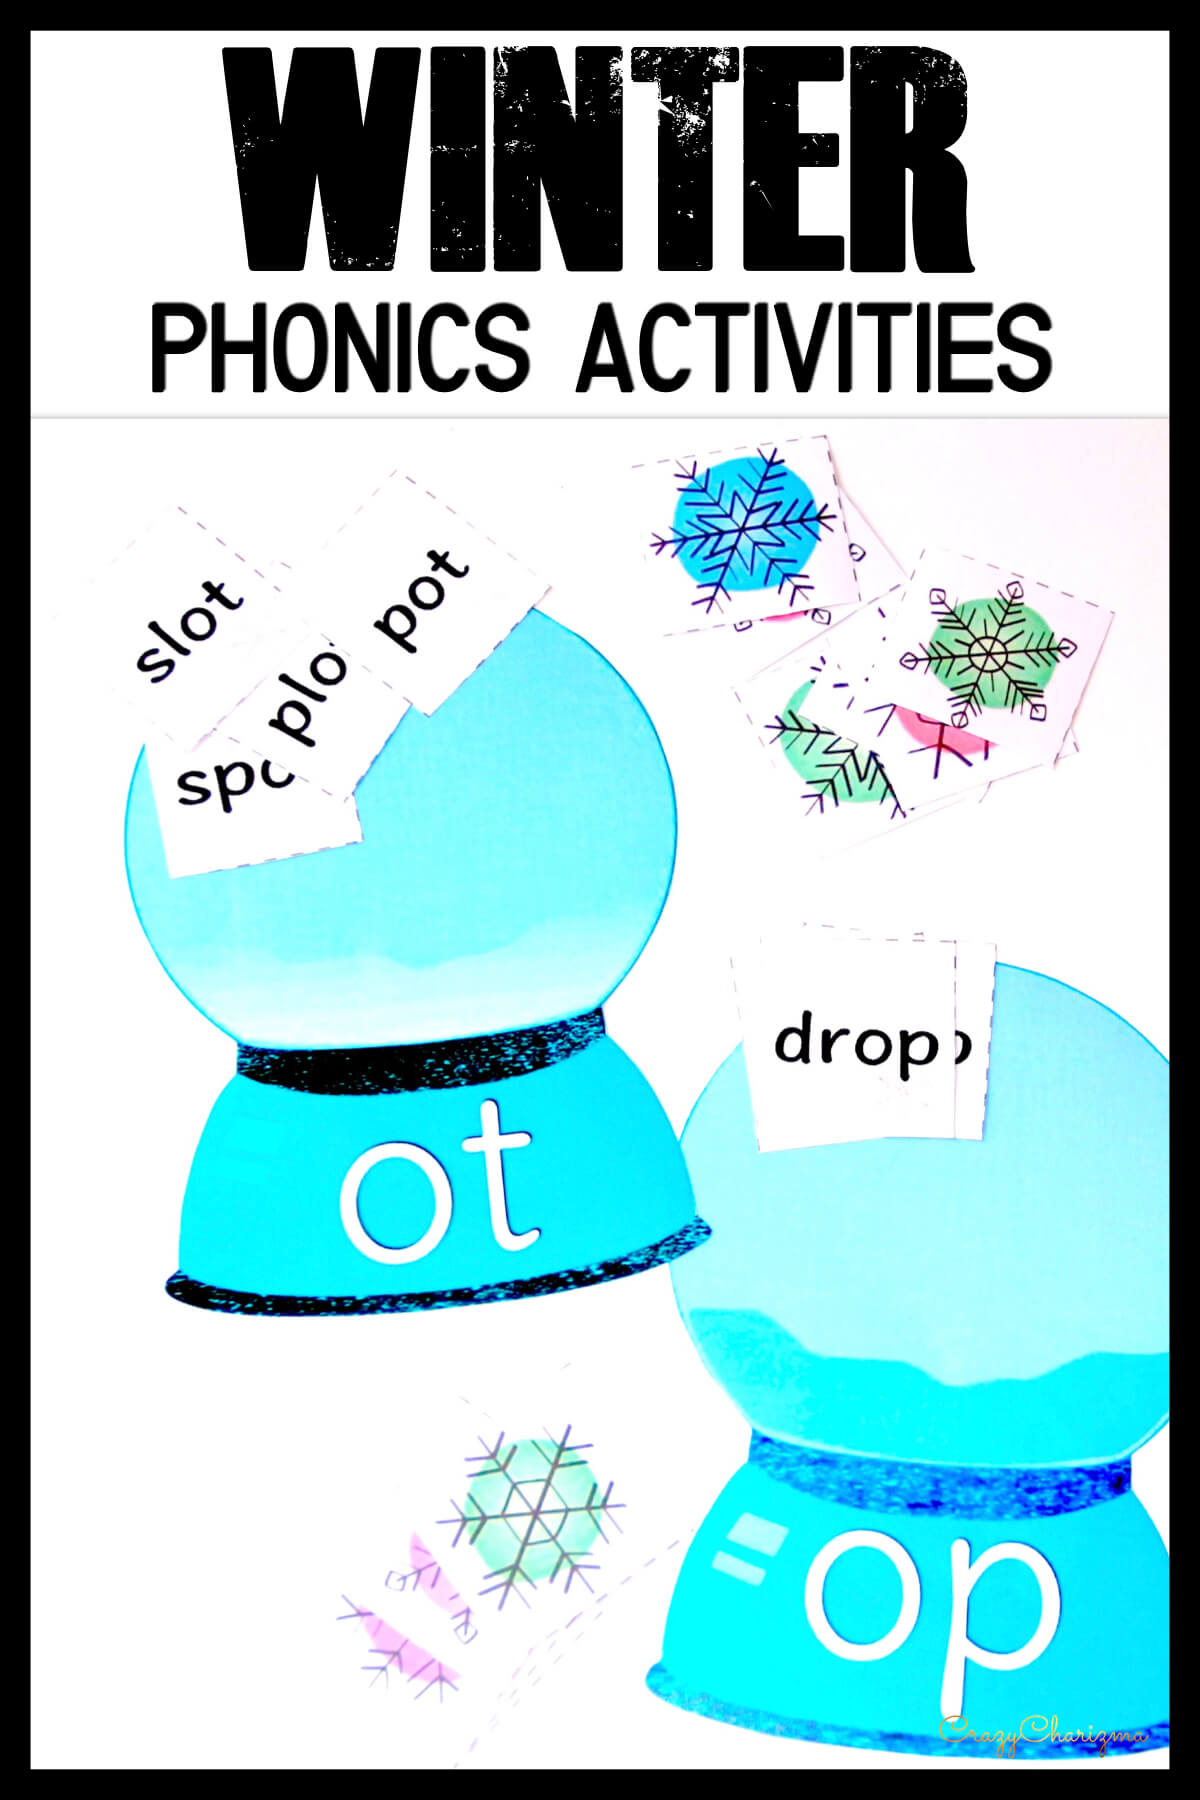 Struggling readers no more! Help students become more comfortable with reading word families words and rhyming. This packet of hands on phonics activities is for kids in preschool, kindergarten, first or second grade. Find inside general printables and seasonal worksheets. Use during daily 5, guided reading, spelling, literacy block, RTI, or during literacy centers.